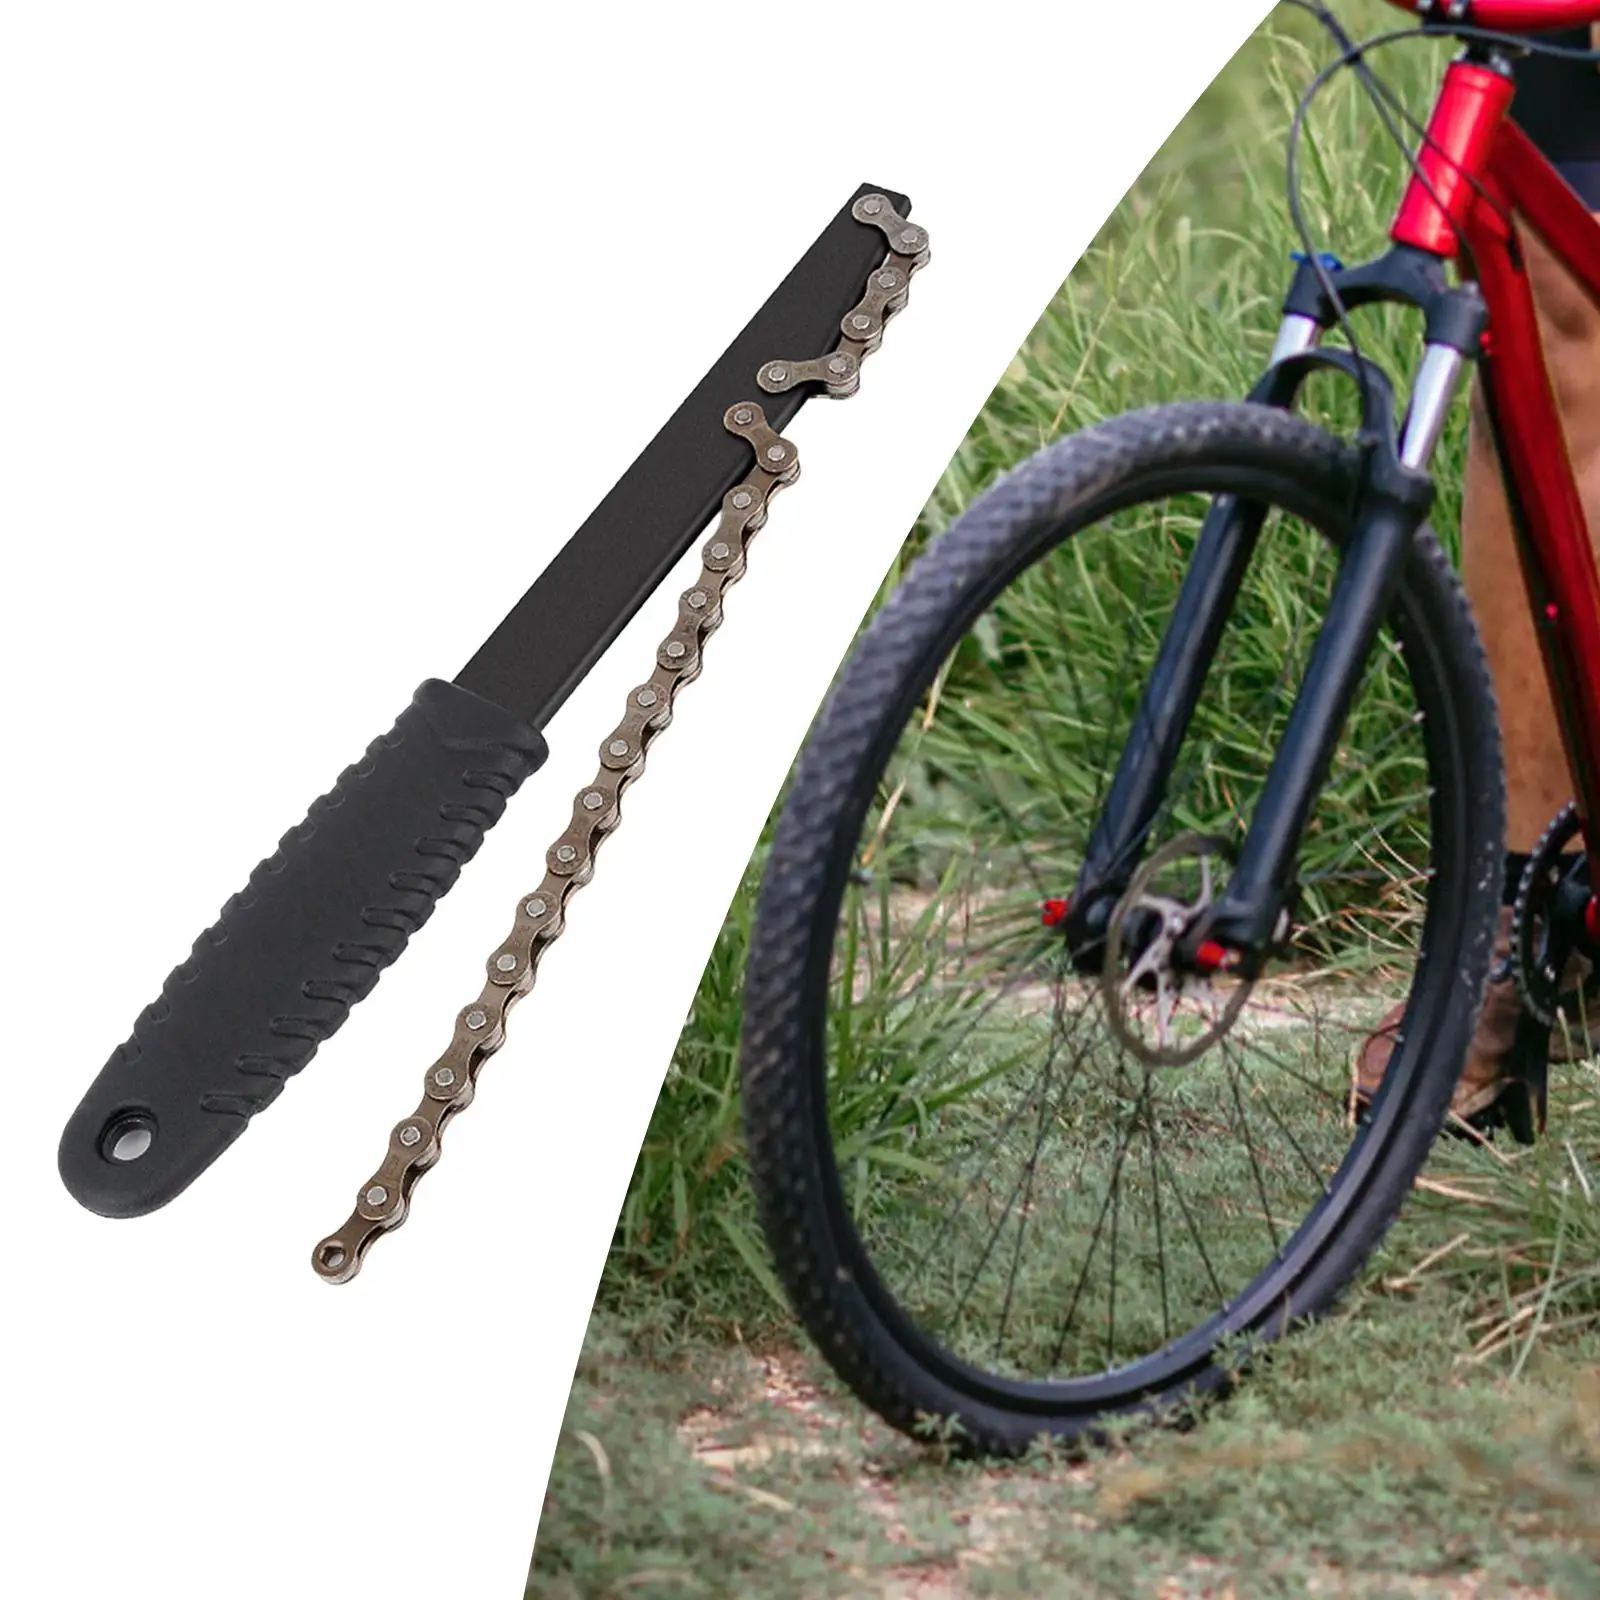 Bike Cassette Removal Tool Freewheel Wrench Wrench Durable Hand Tool Cassette Tool Chain Whip Bottom Tool for Riding Outdoor